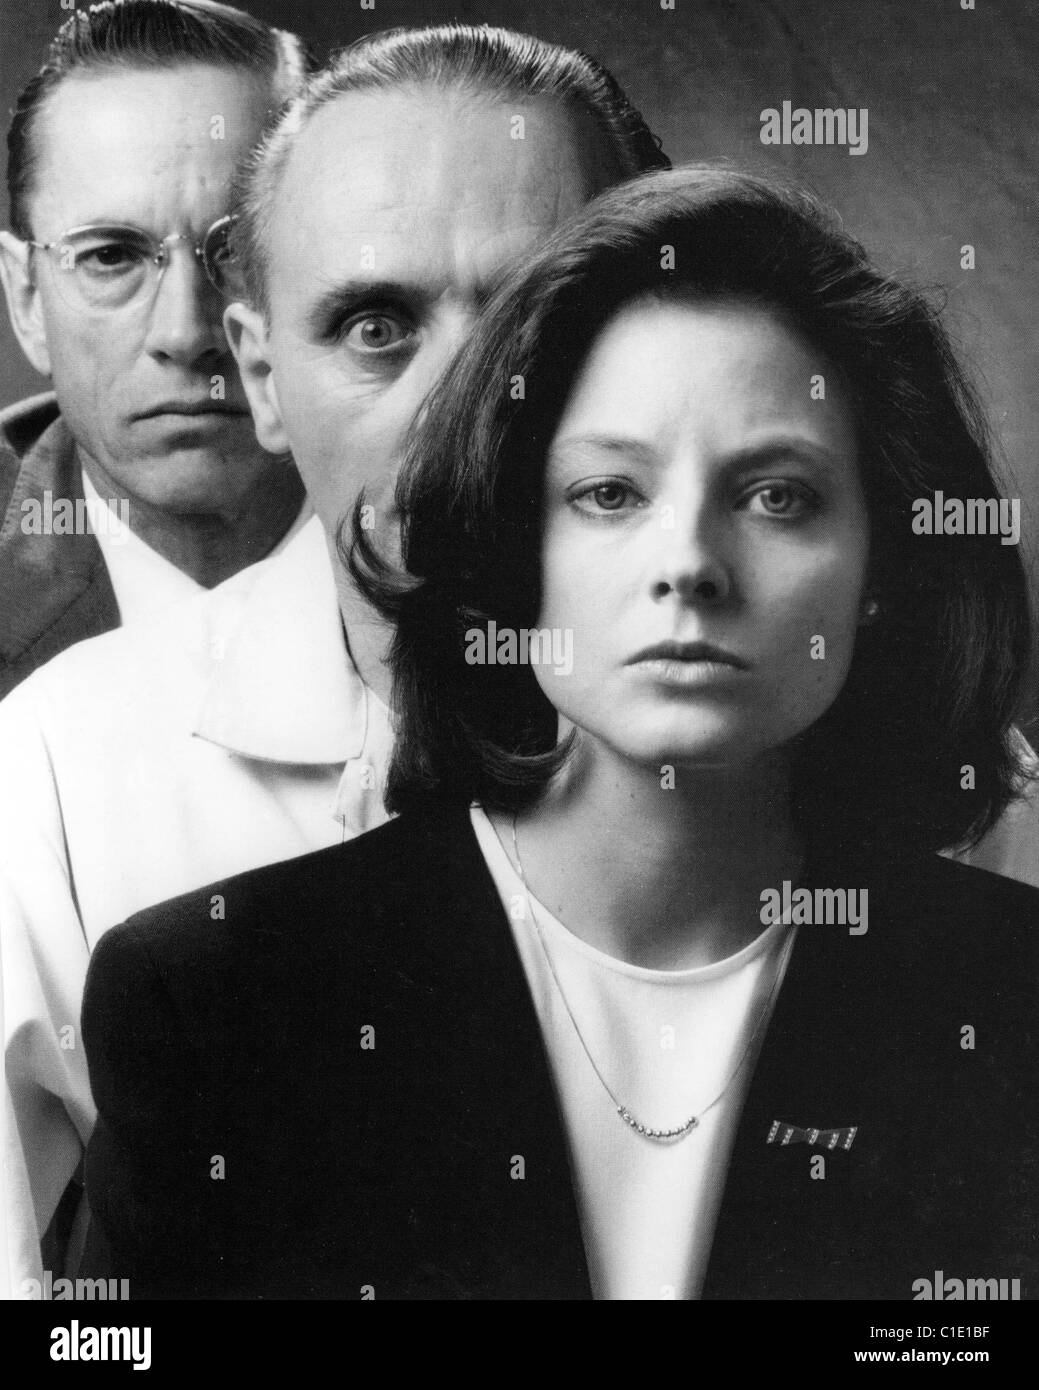 THE SILENCE OF THE LAMBS 1991 Orion film with from left: Scott Glenn, Anthony Hopkins and Jodie Foster Stock Photo